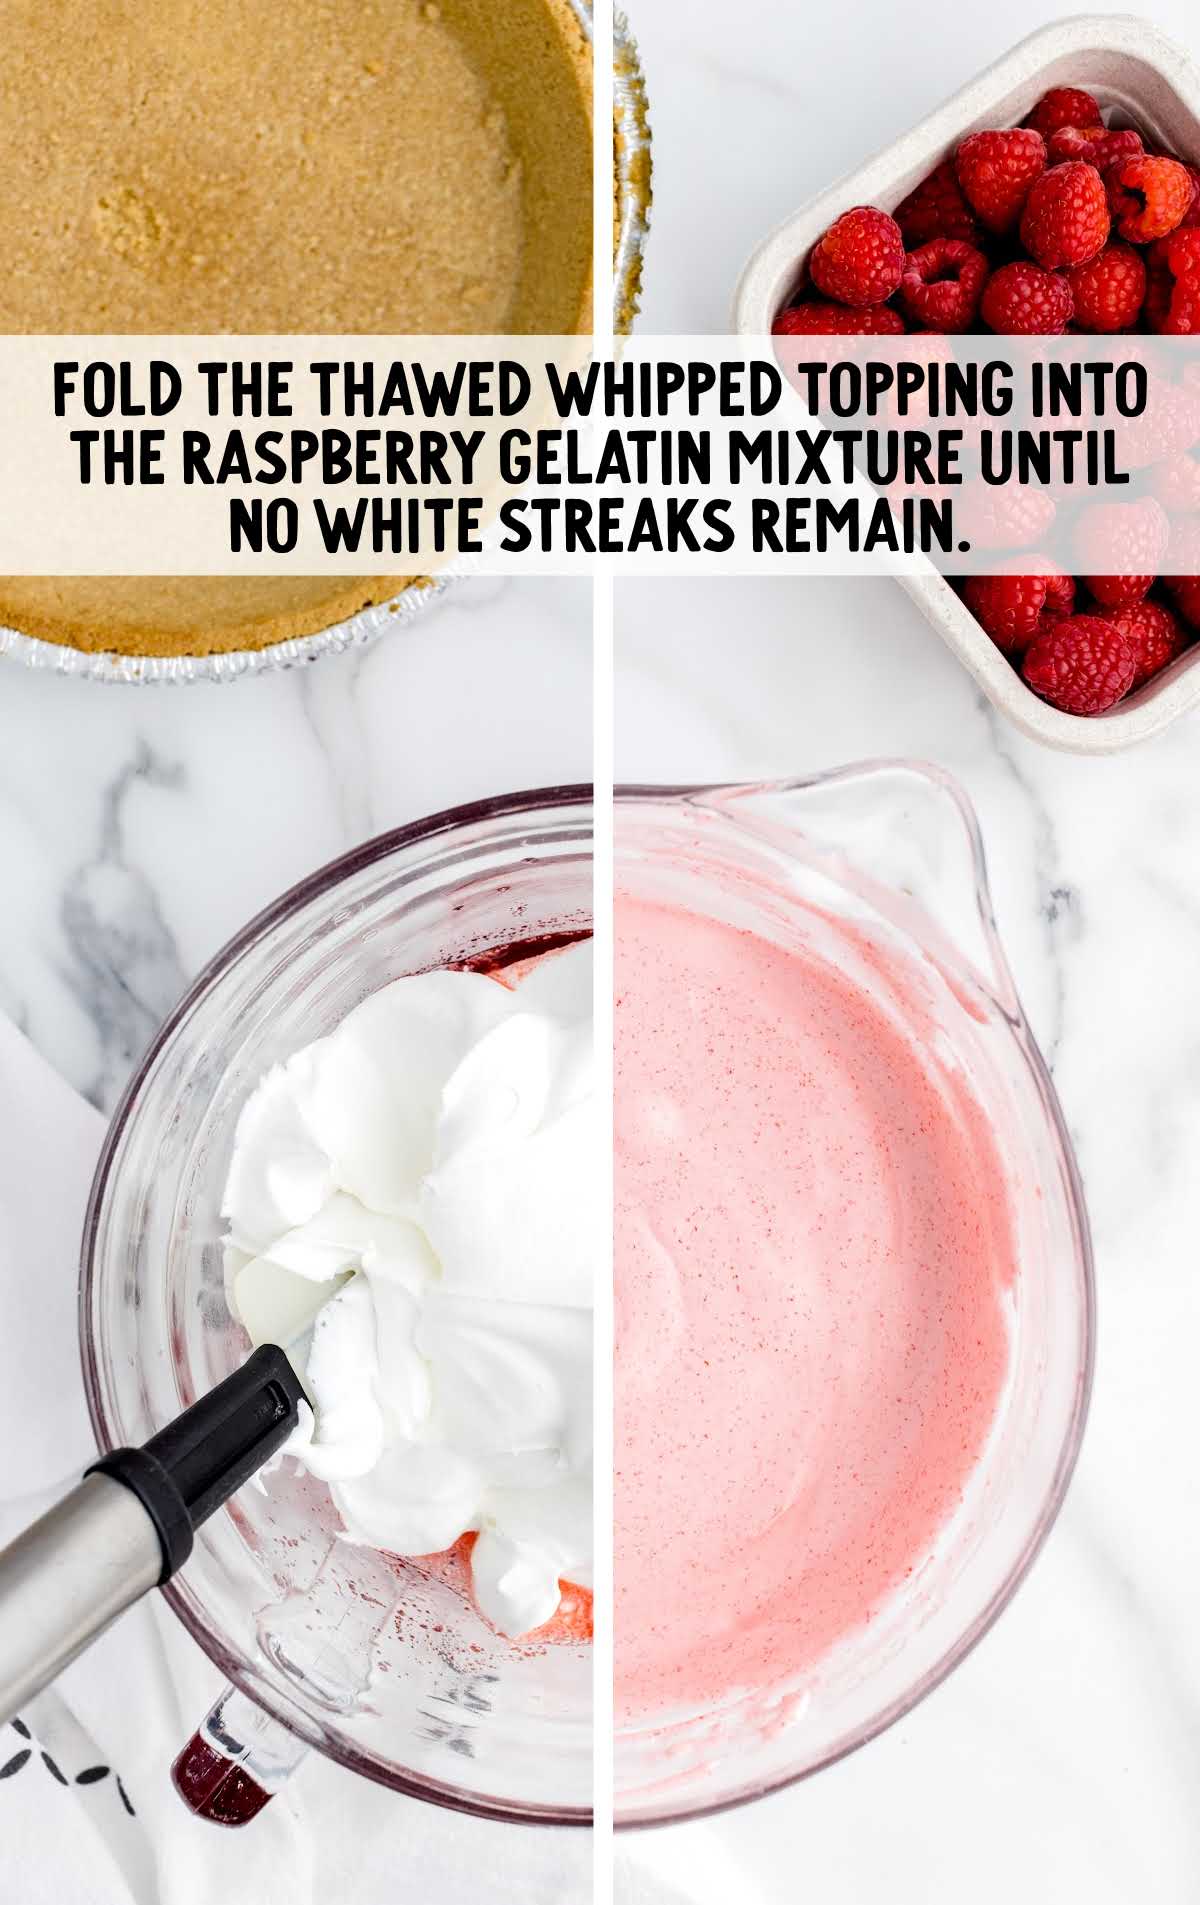 thawed whipped topping folded into the raspberry gelatin mixture